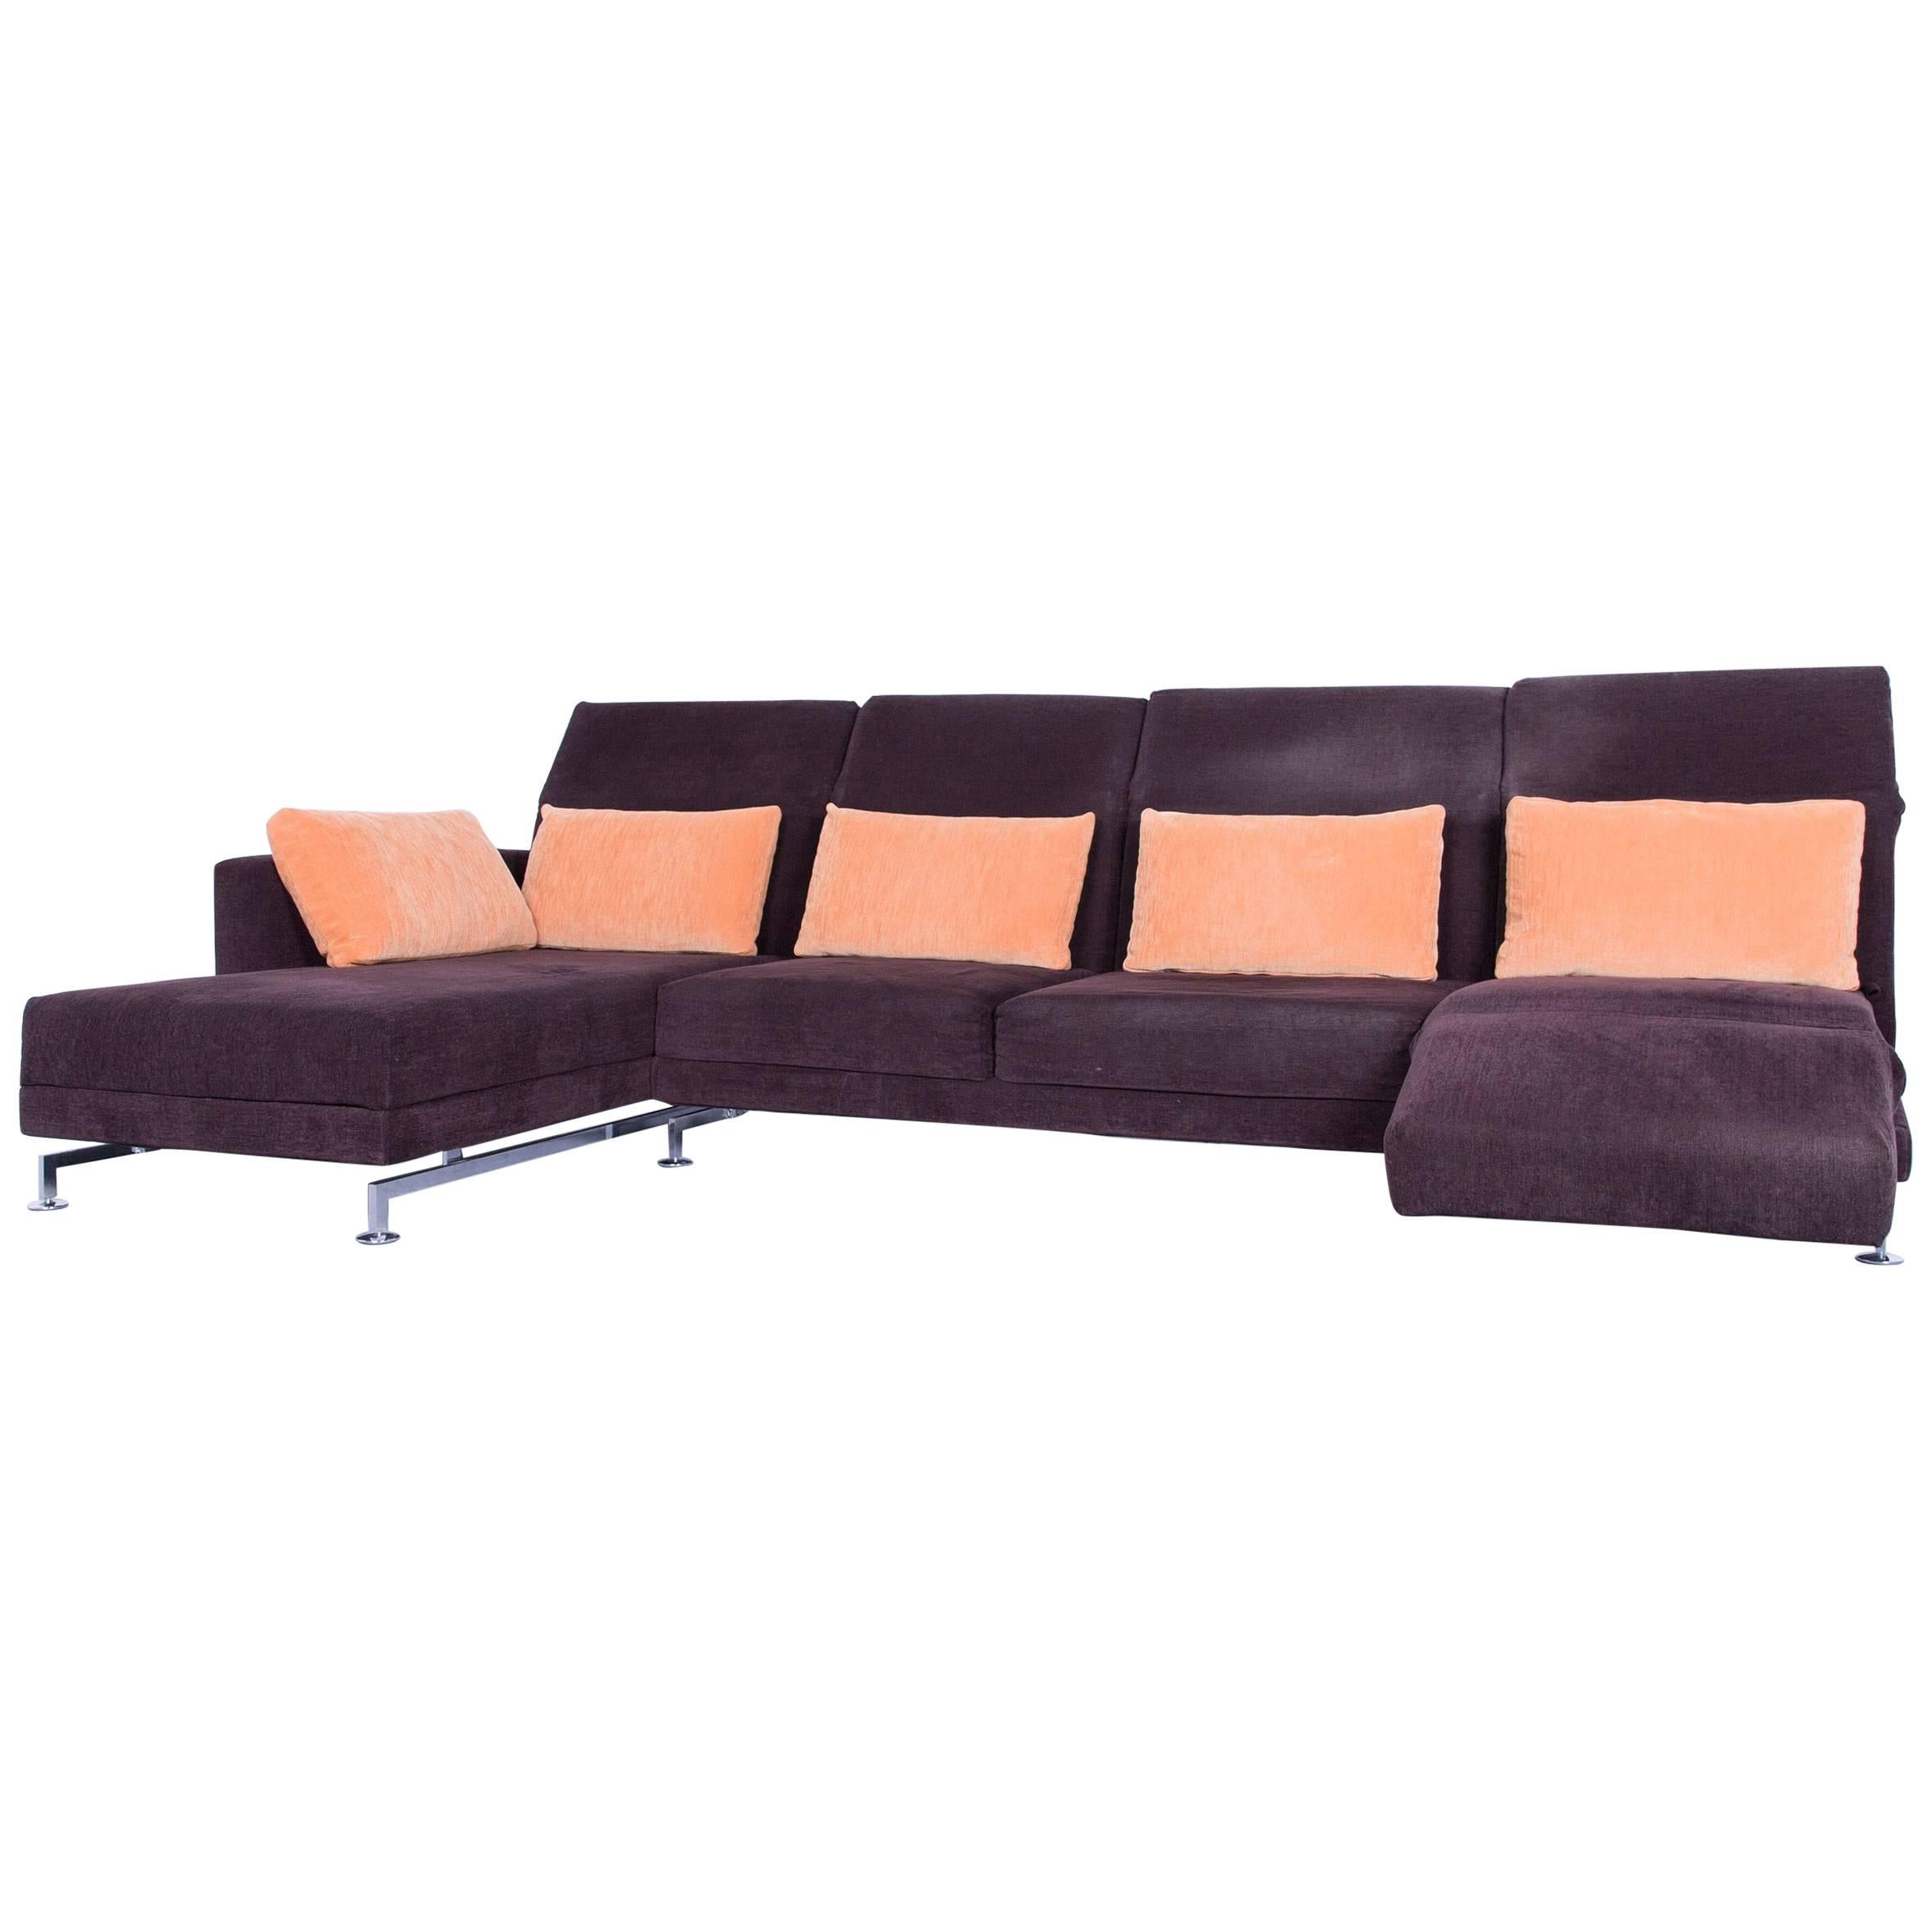 Brühl & Sippold Moule Designer Corner-Sofa Brown Couch Fabric